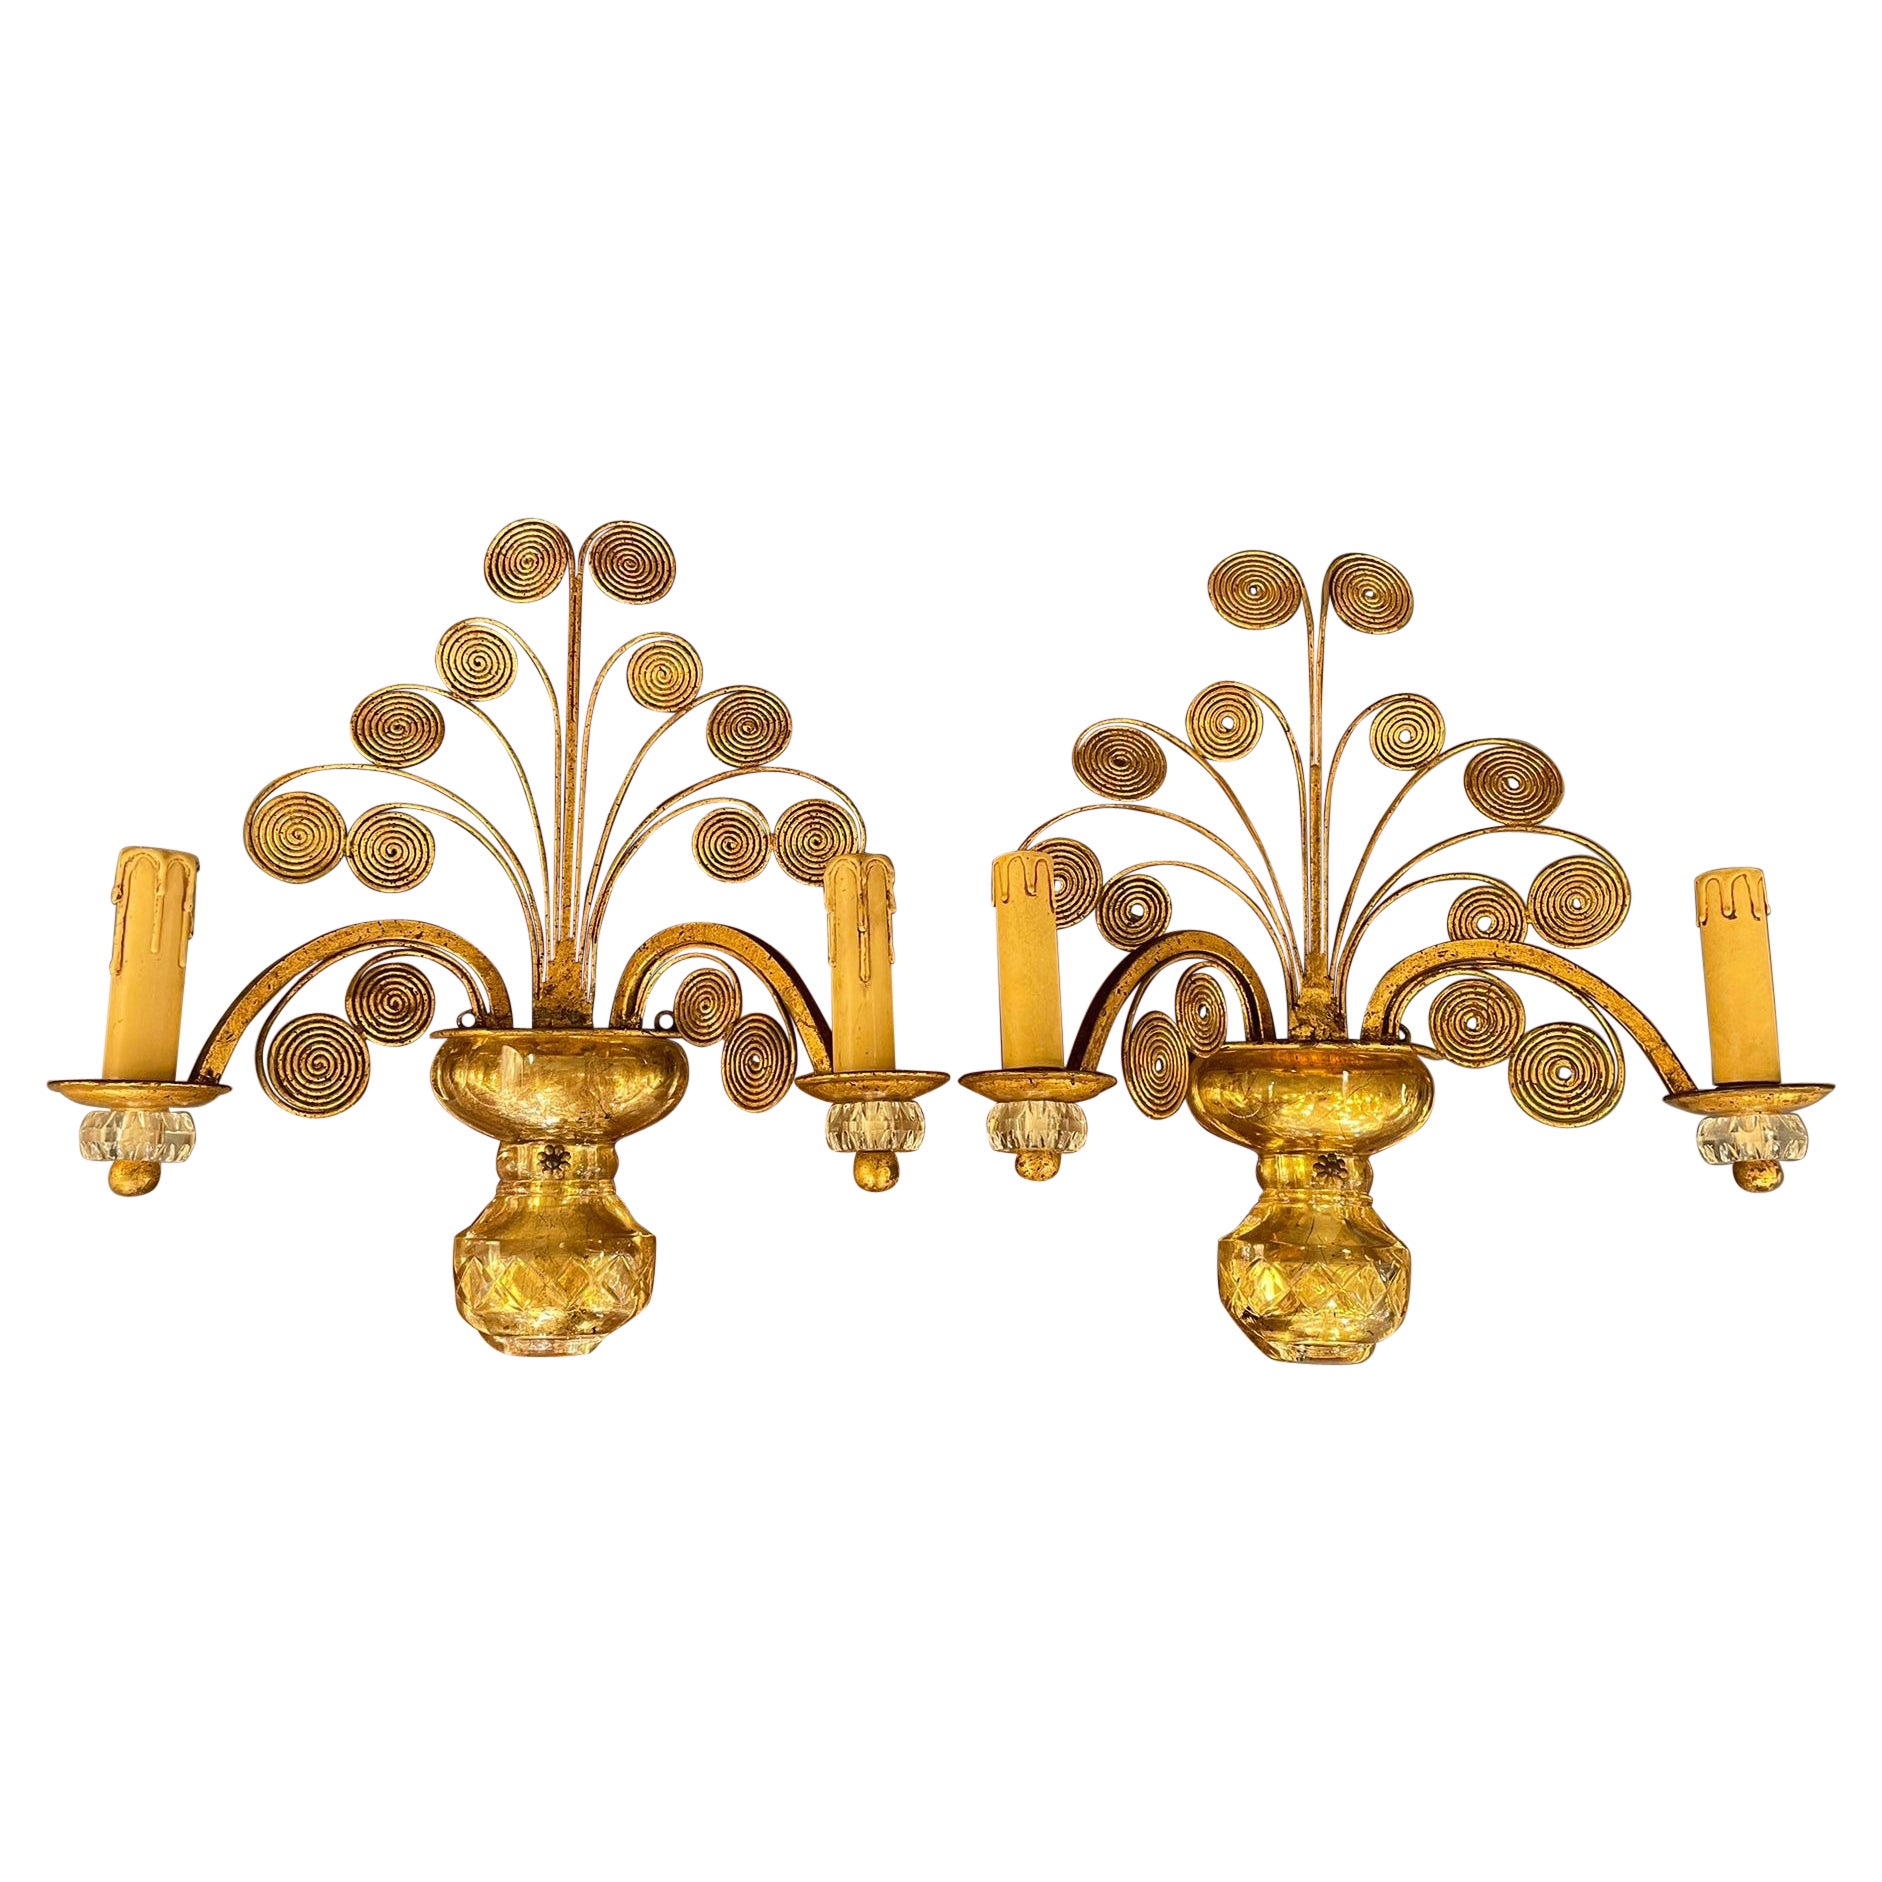 Pair of  Sconces in the Style of Maison Bagues